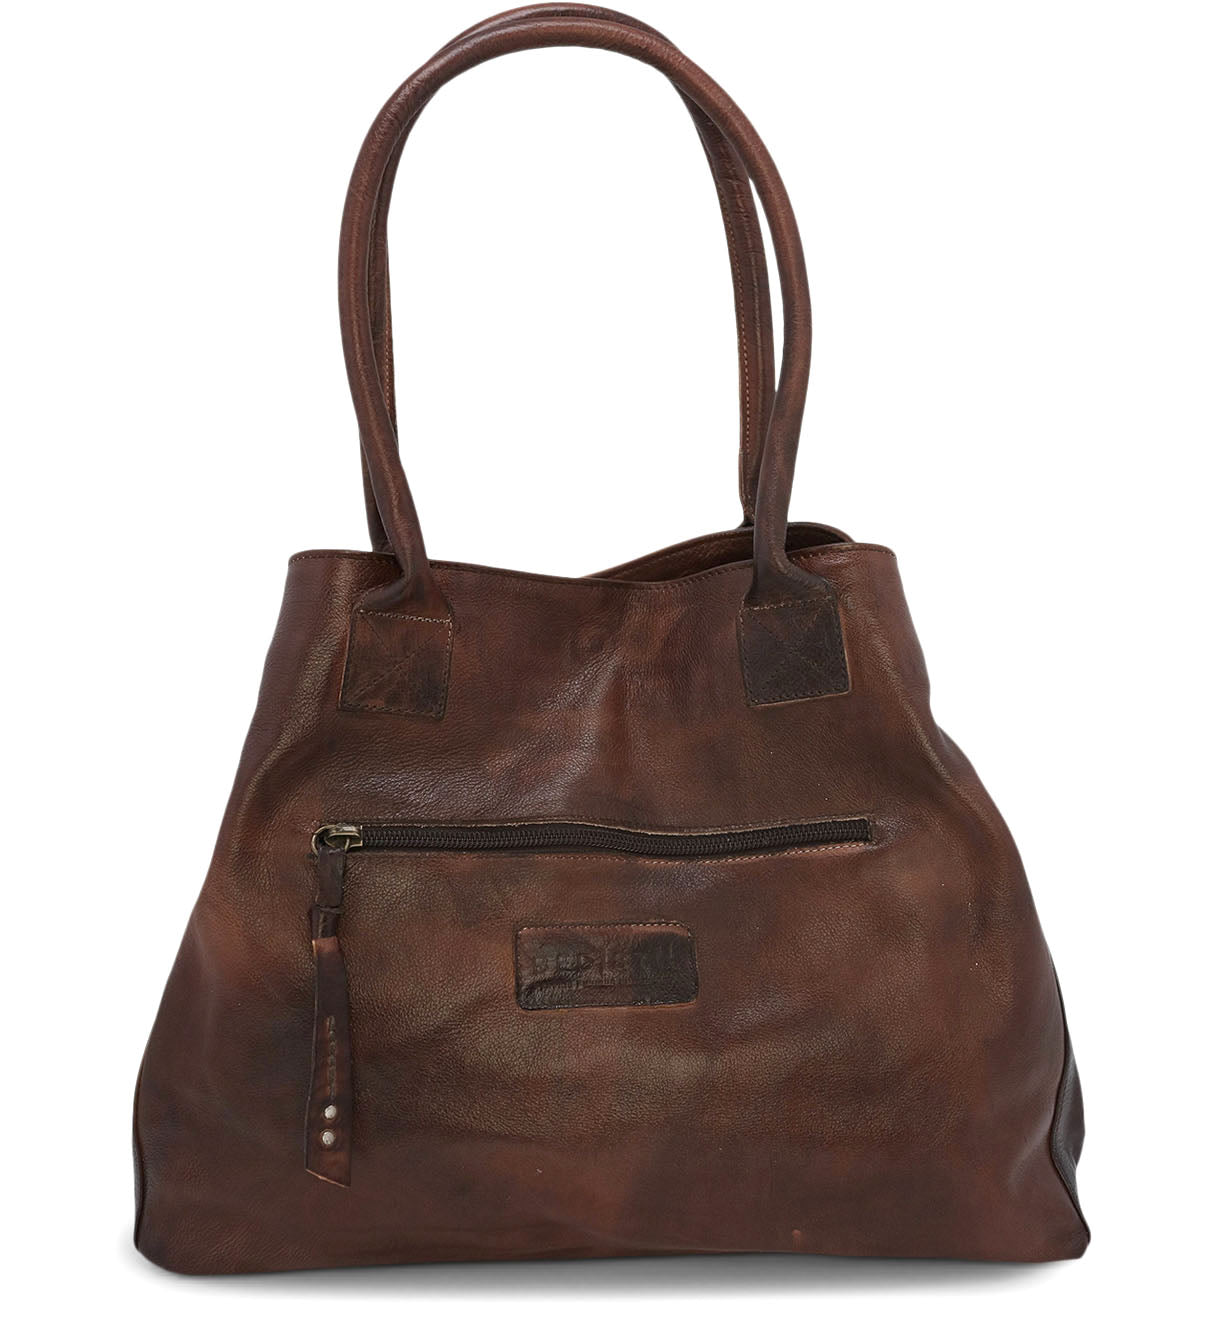 The Cersei women's brown leather tote bag by Bed Stu.